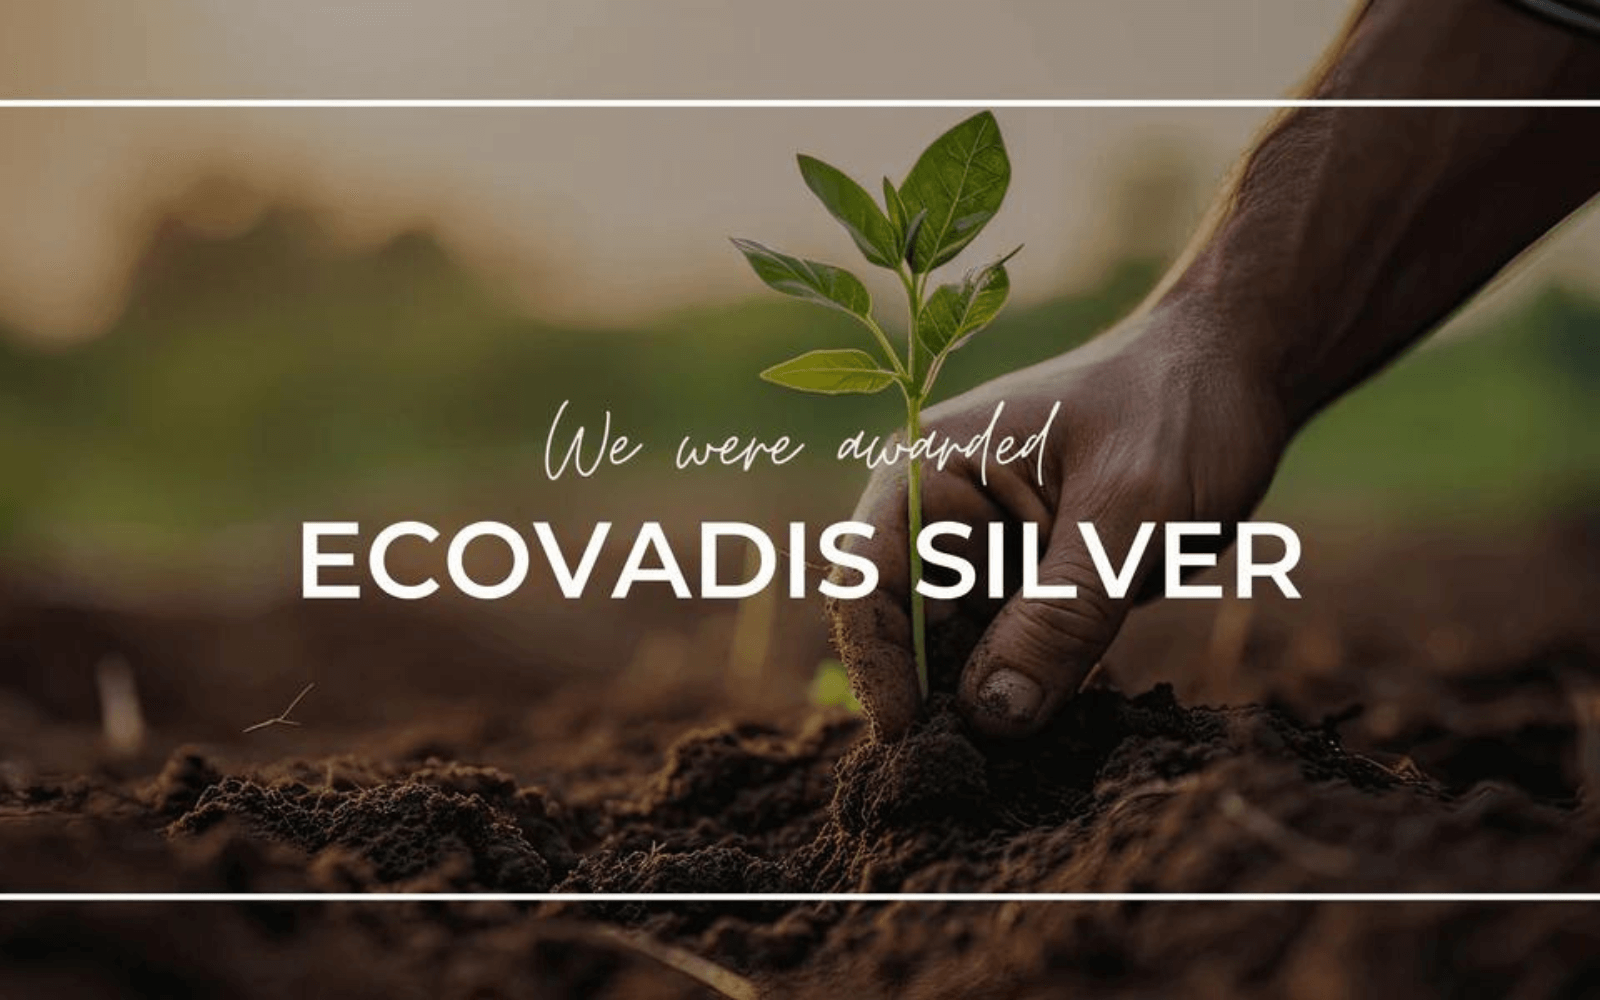 TROIKA RECEIVES ECOVADIS SILVER MEDAL FOR SUSTAINABILITY